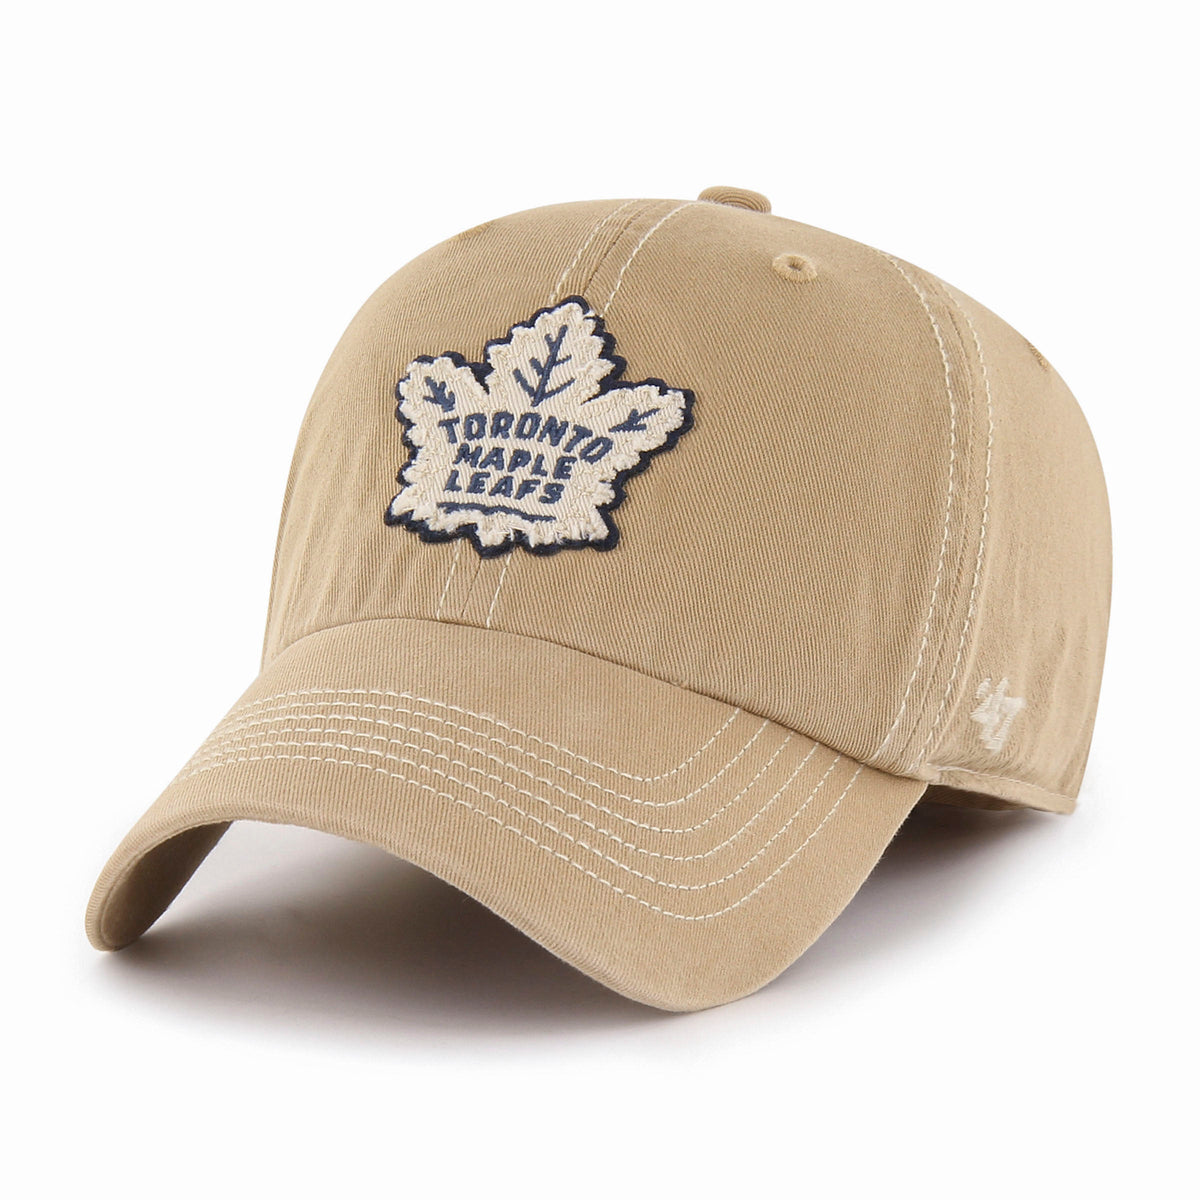 TORONTO MAPLE LEAFS HAVEN '47 FRANCHISE